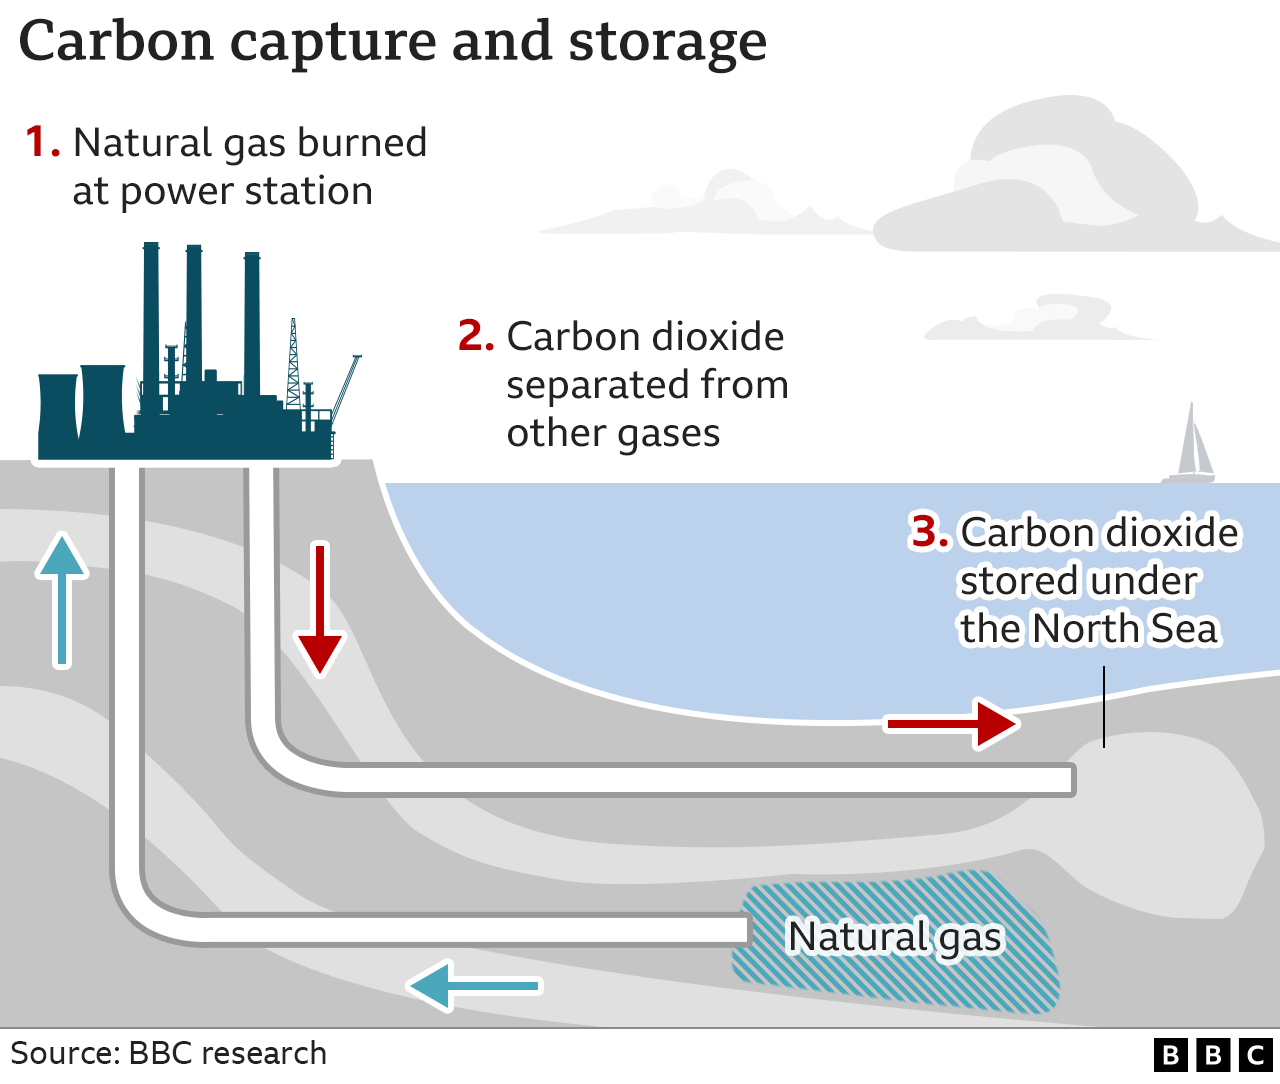 Schematic of the carbon capture process showing firstly natural gas being burned in a power station, secondly CO2 being separated from other gases, and thirdly CO2 being stored under the North Sea.